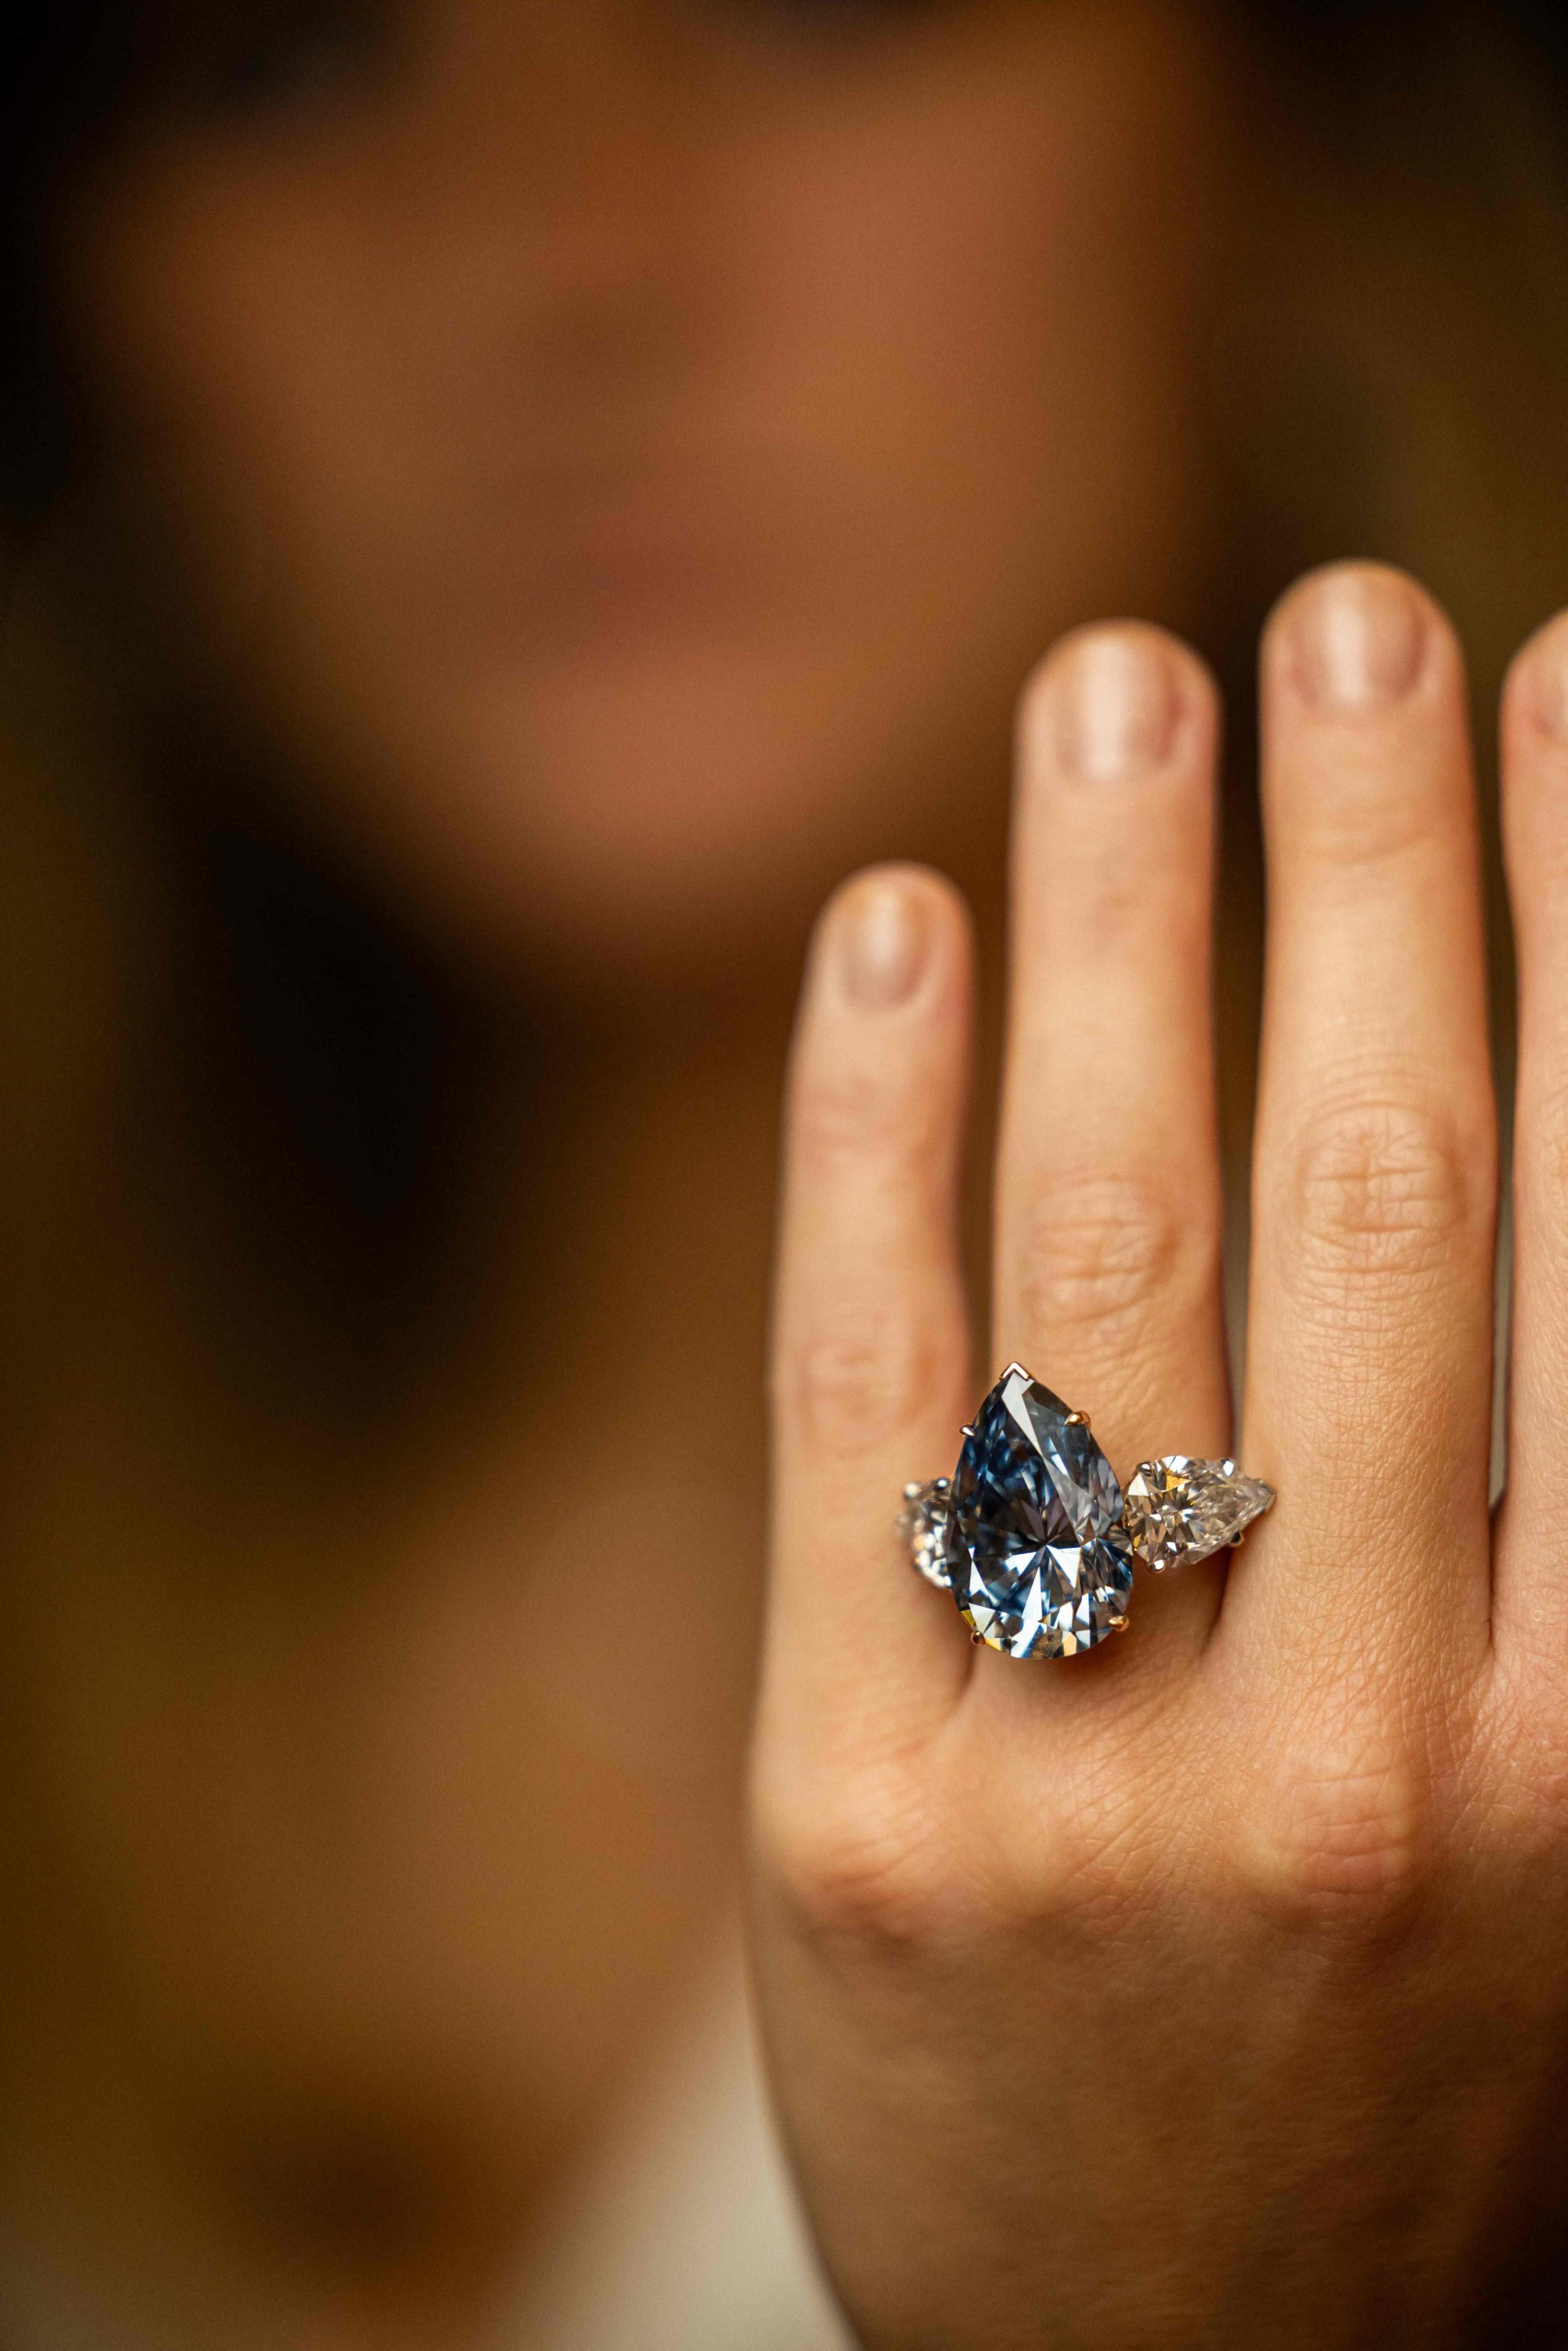 The Bleu Royal, one of the most expensive diamonds ever sold? The